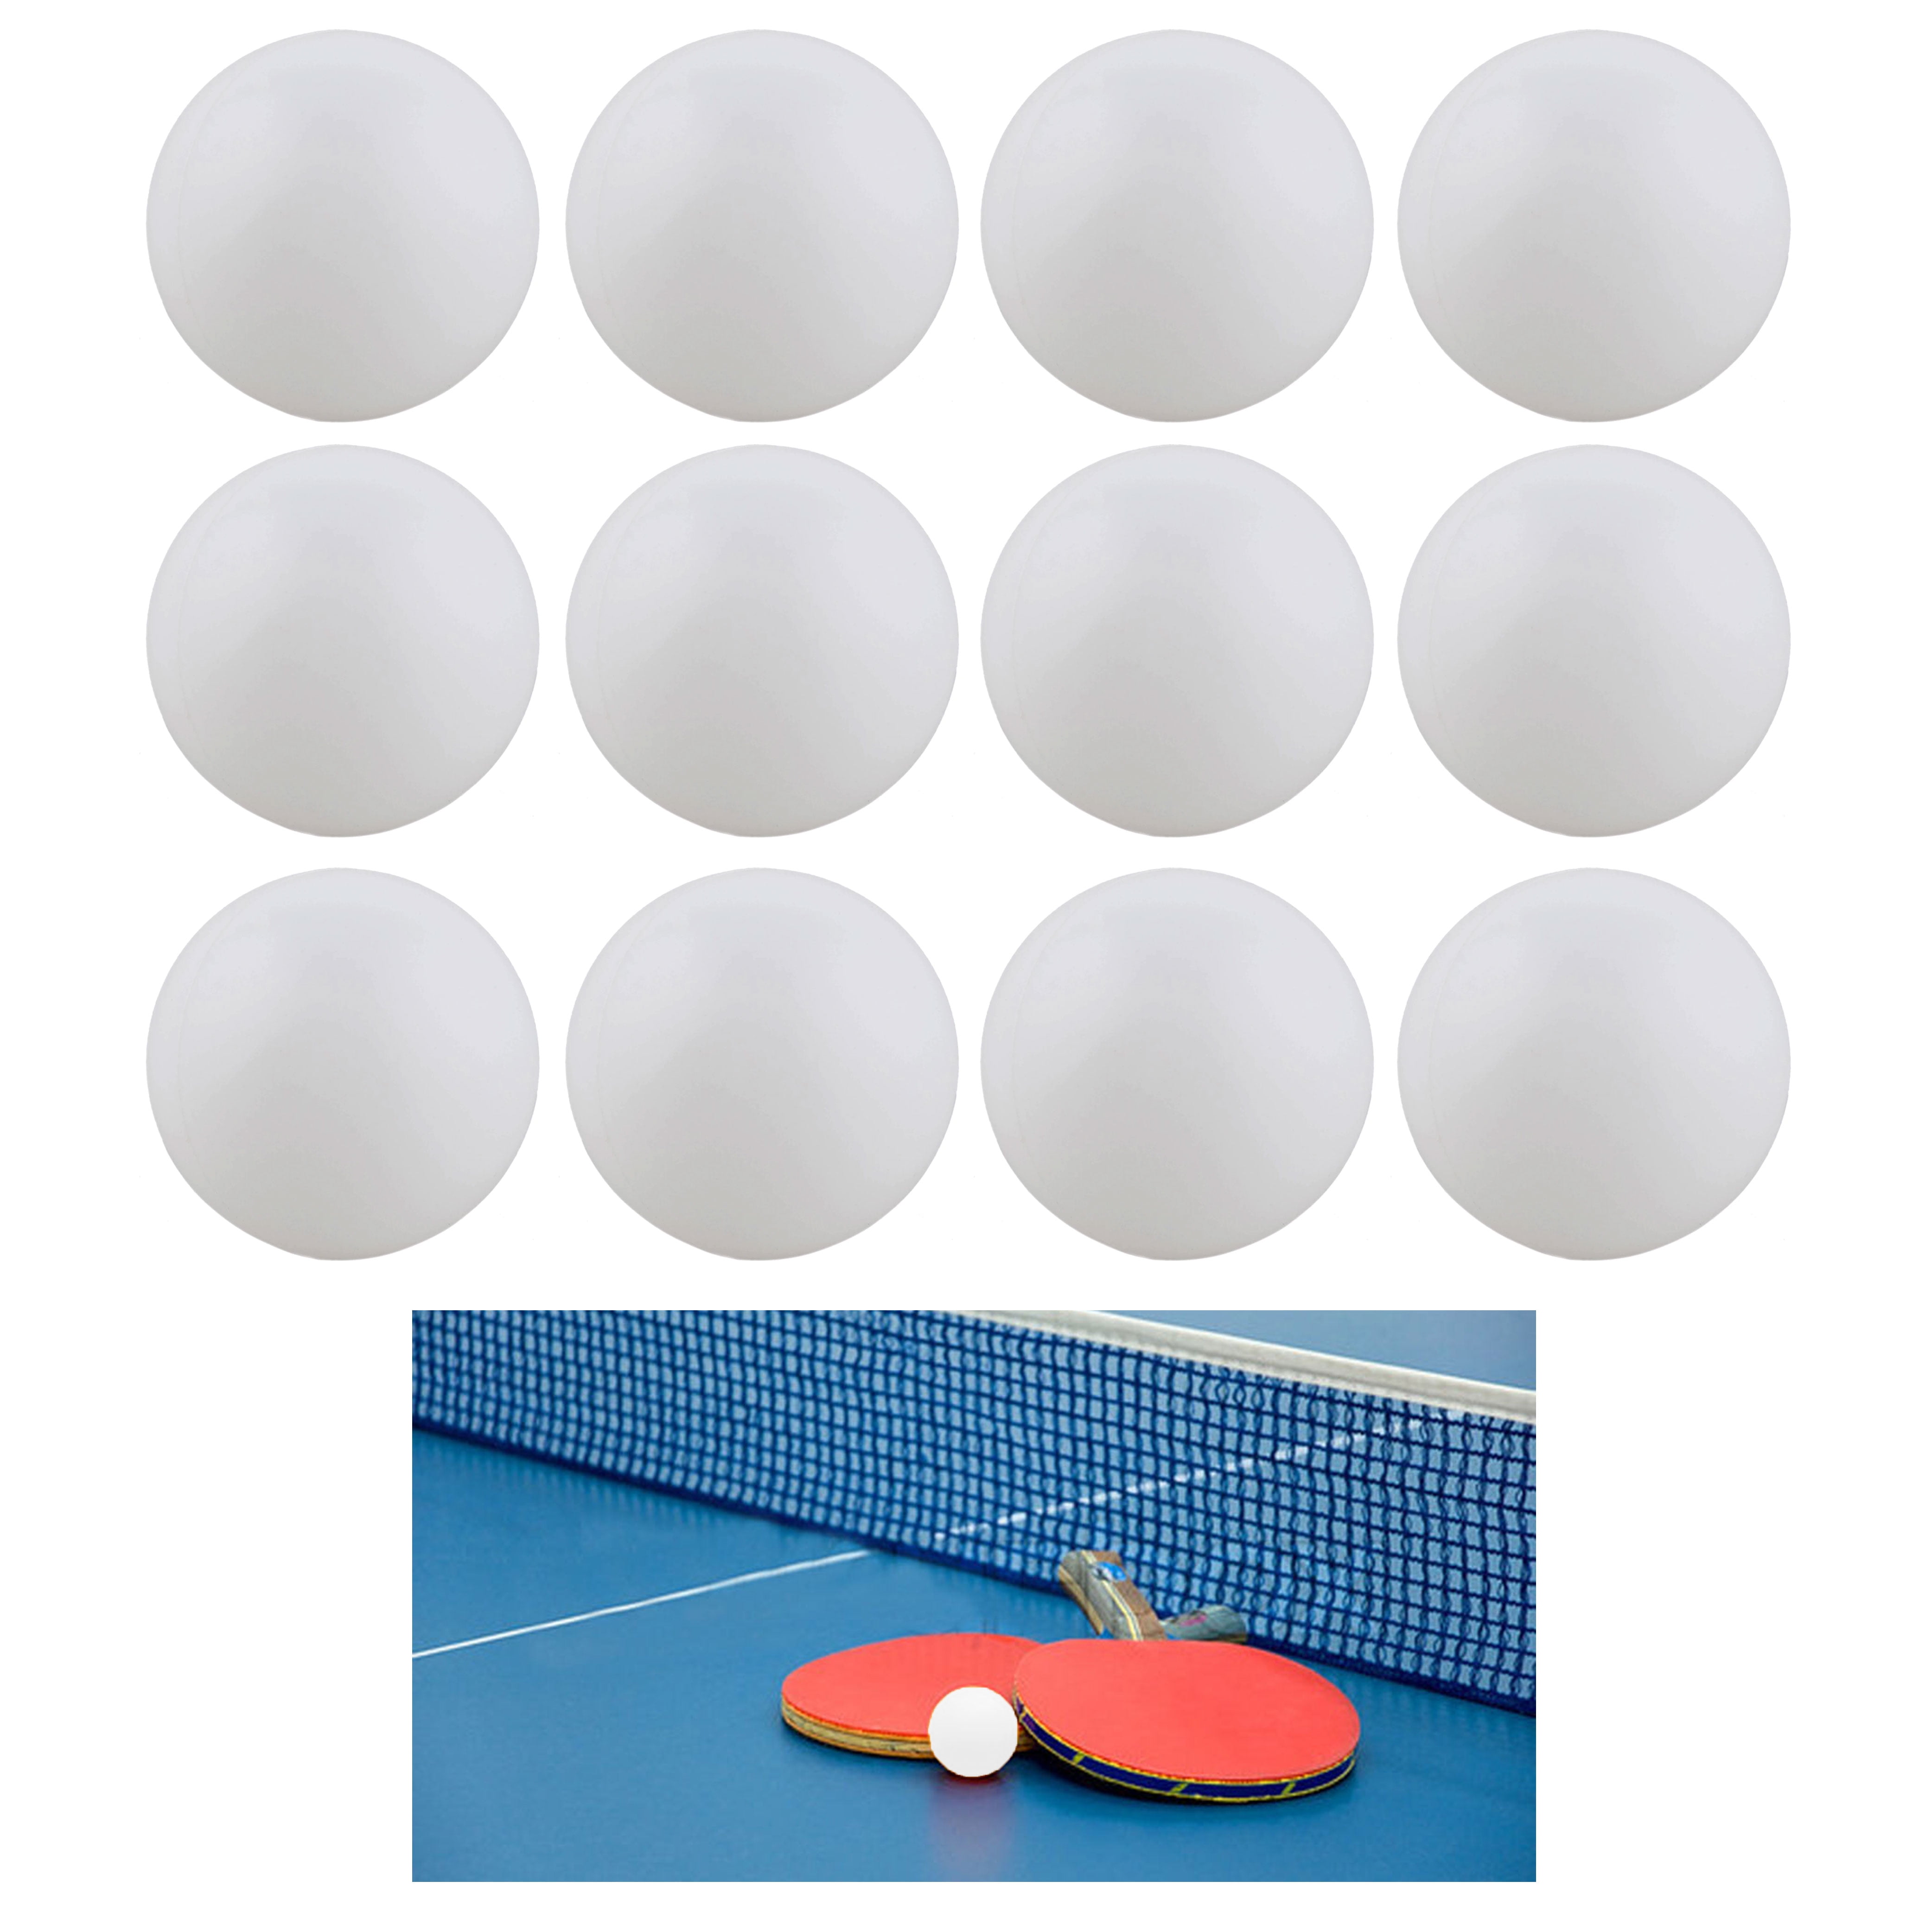 38mm 144 Practice Ping Pong Balls Beer Pong Table Tennis Carnival Games 